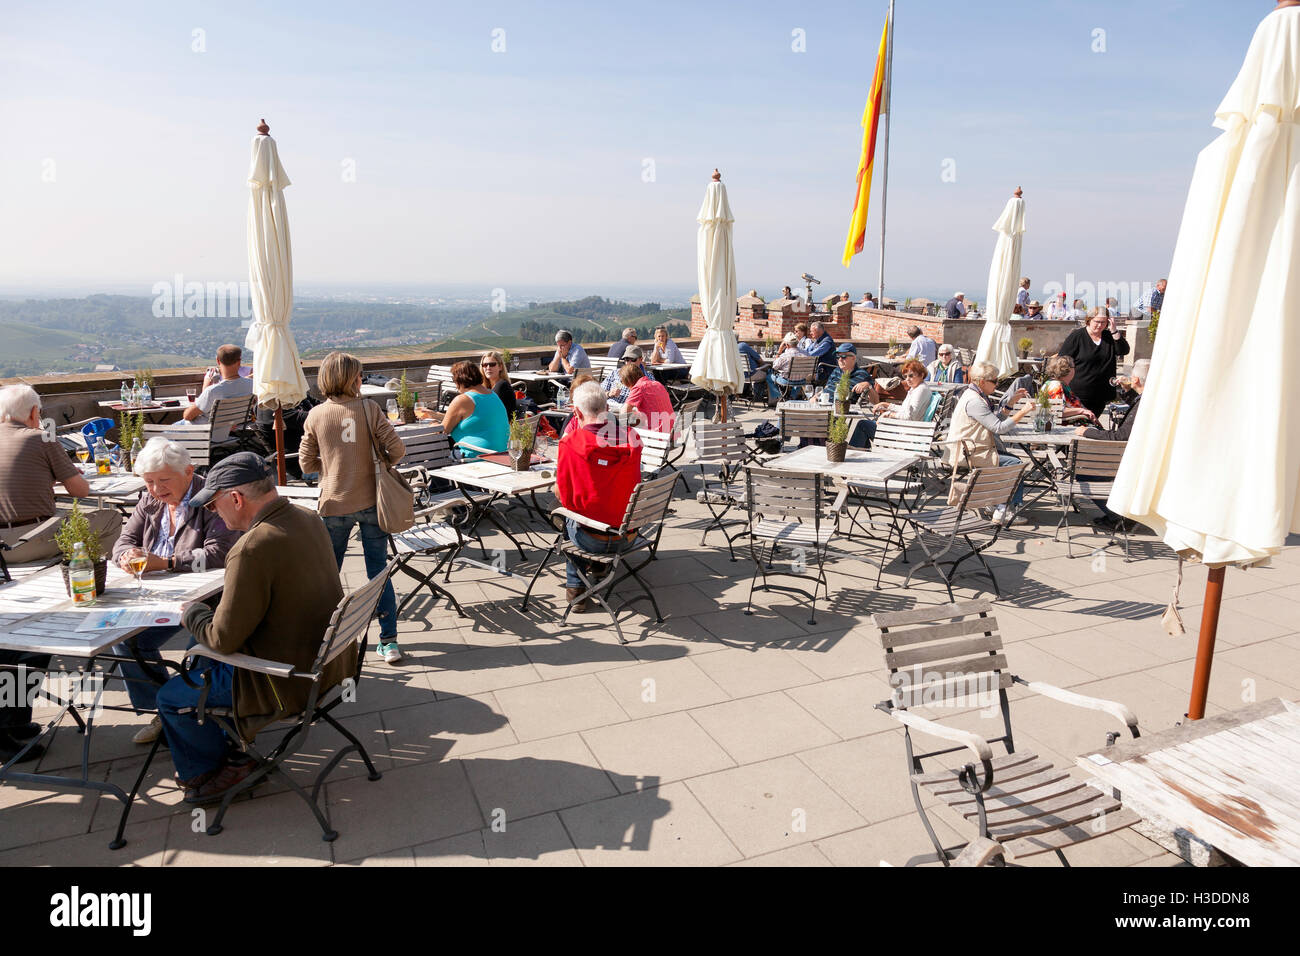 Outdoor patio with people at  Markgraf von Baden Schloss,Castle in Southern Germany, Europe,Schloss Staufenberg Winery,Durbach Stock Photo